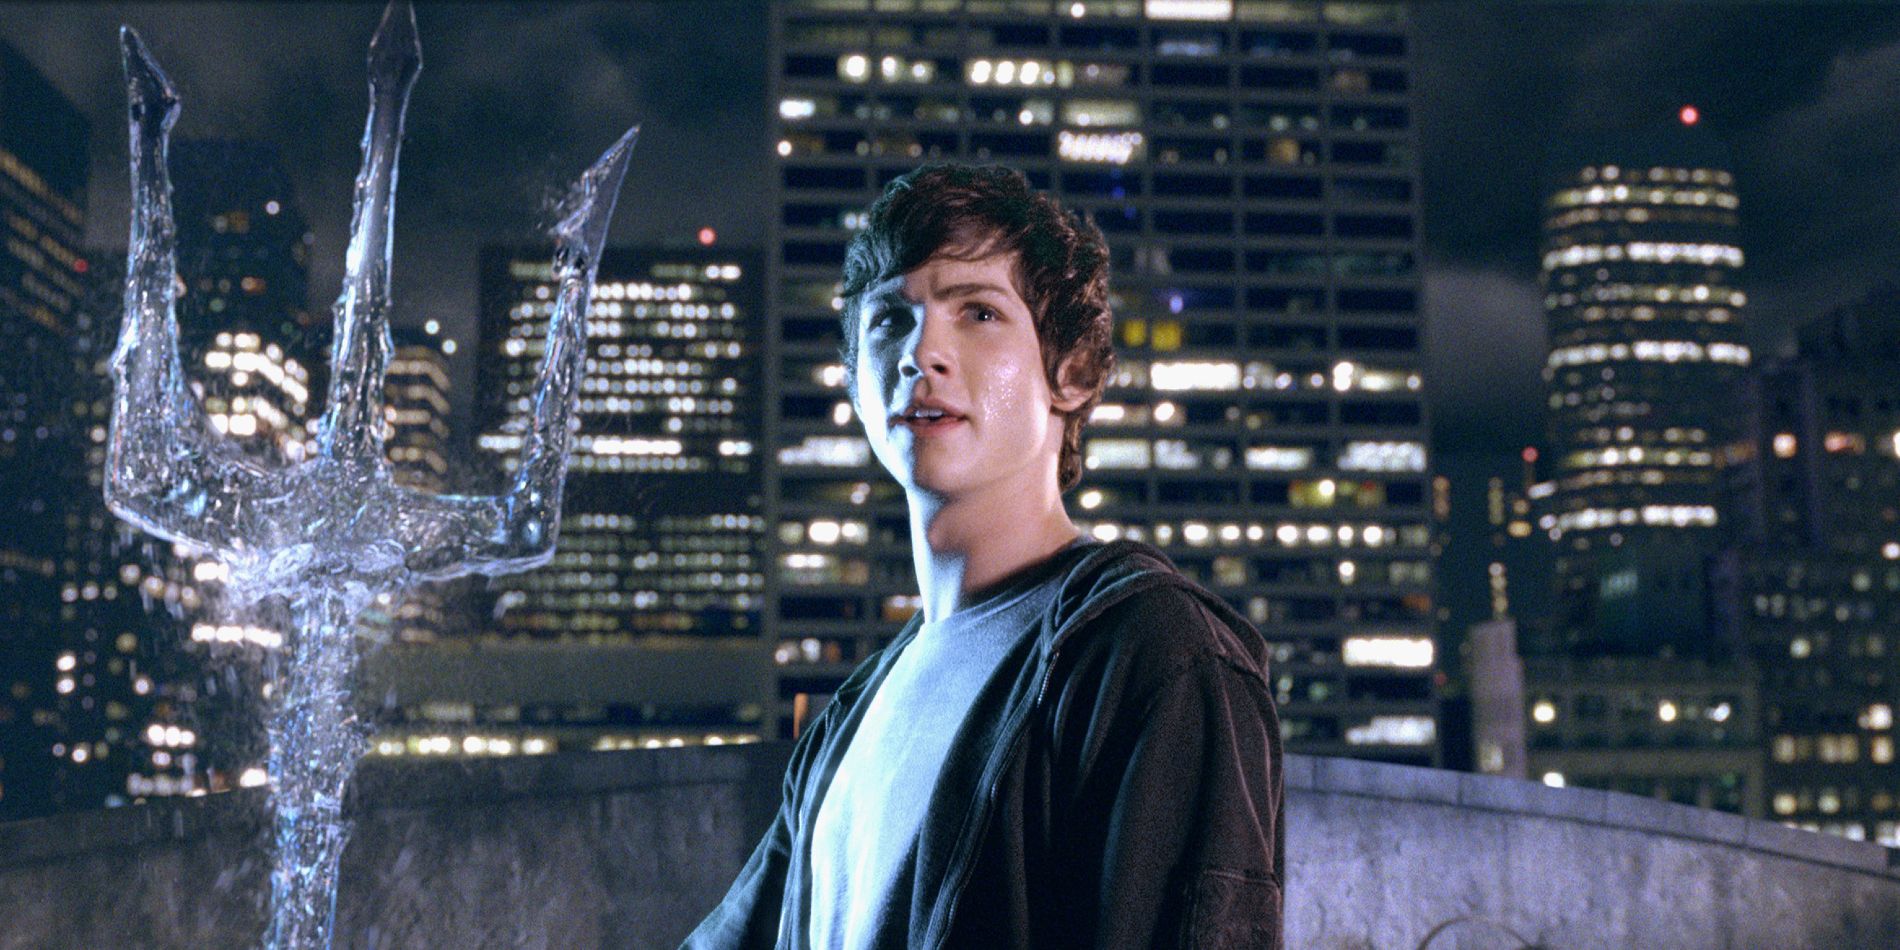 Percy Jackson With Trident in Percy Jackson and the Lightening Thief